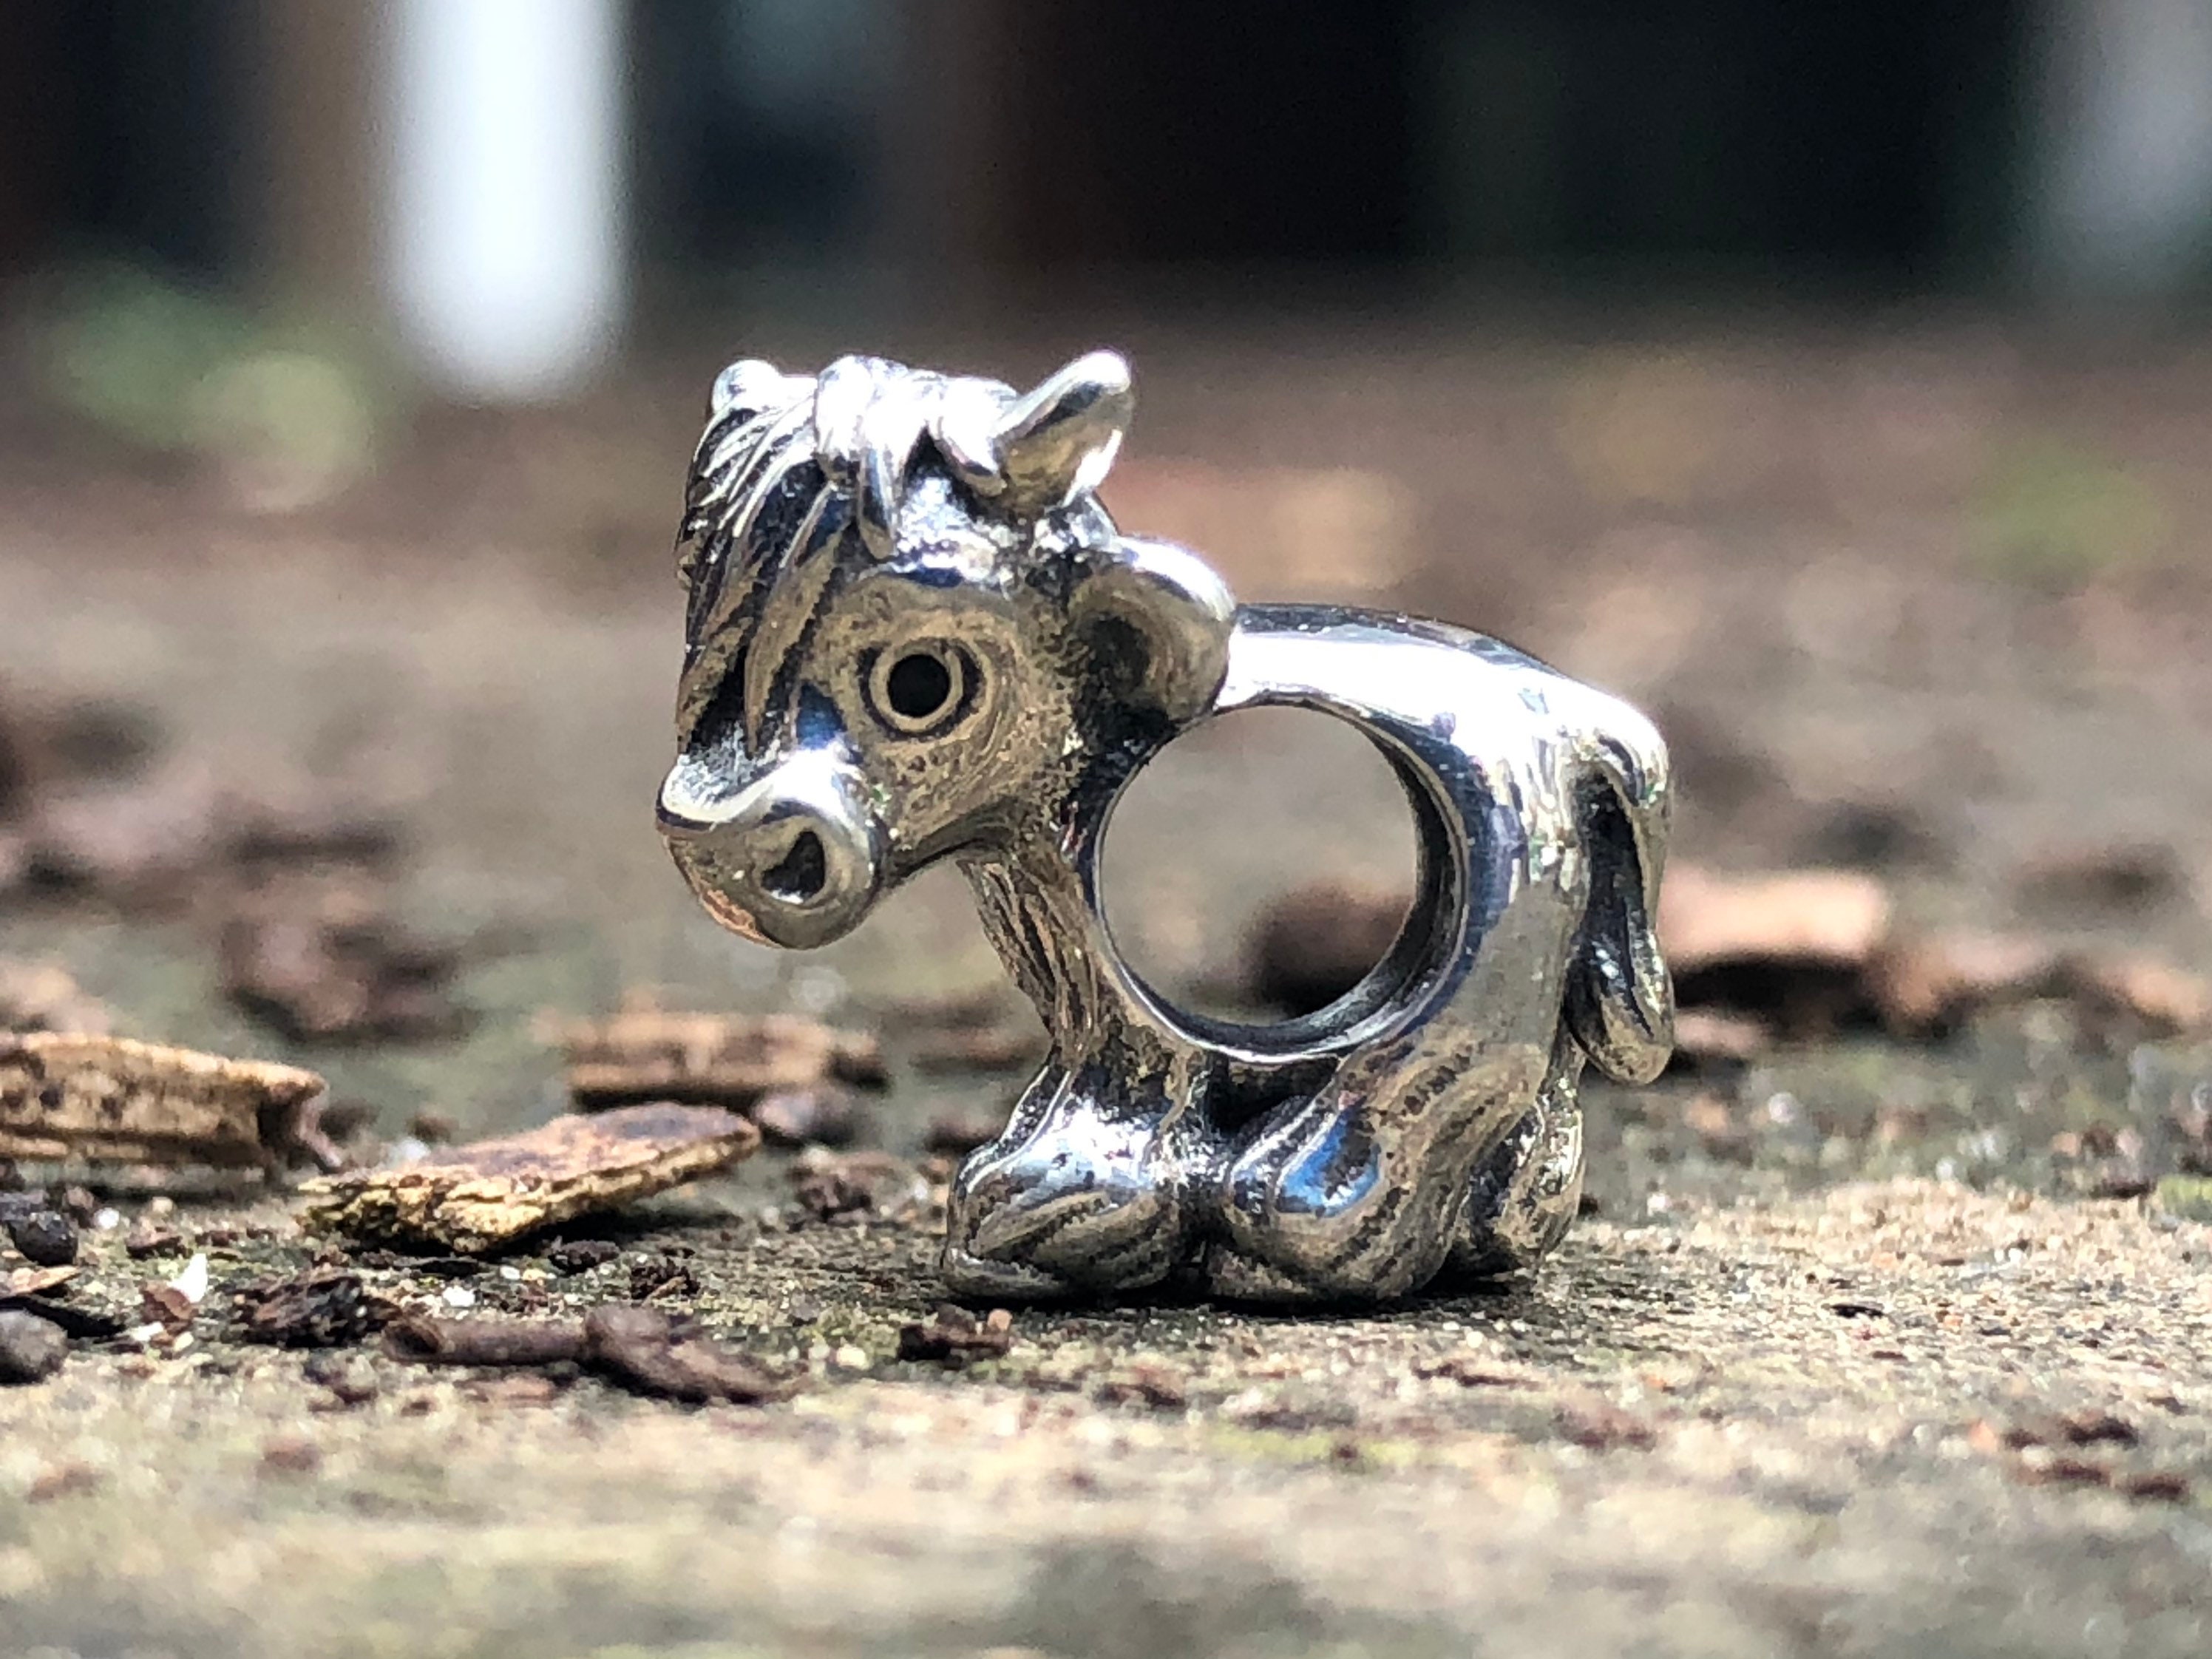 Cute Cow 925 Sterling Silver Pandora Fit Charm 